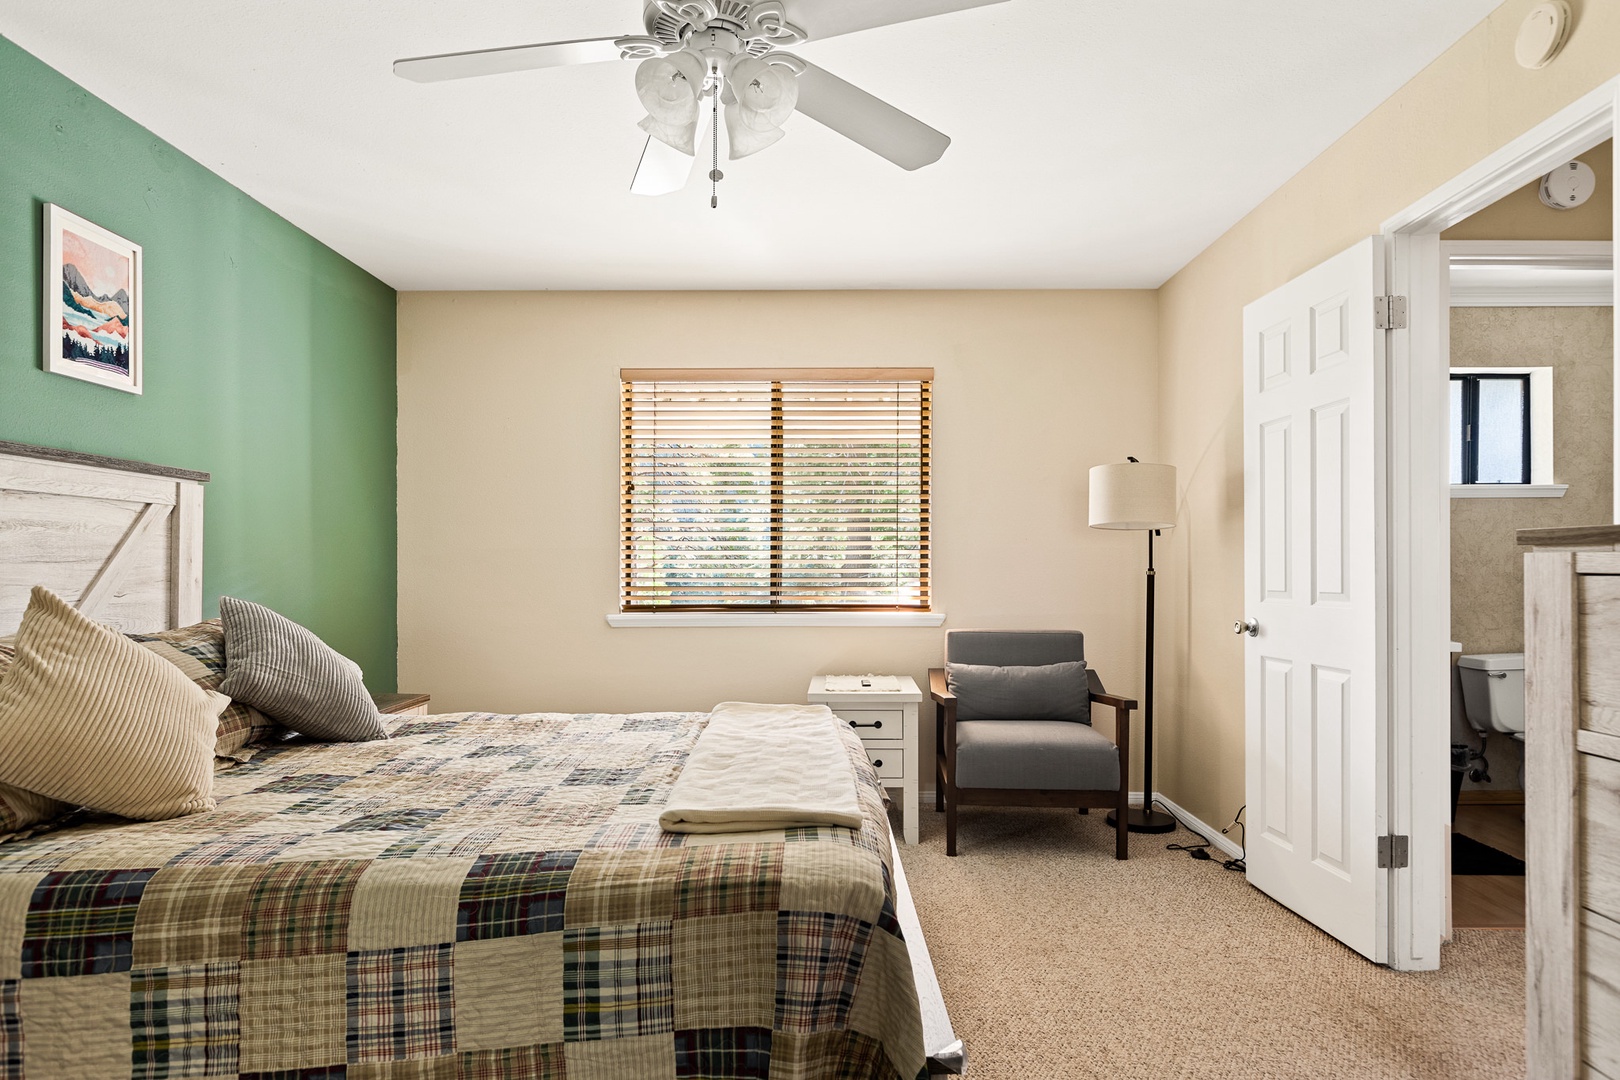 The 1st of two bedroom offers a queen bed, ceiling fan, & plenty of space